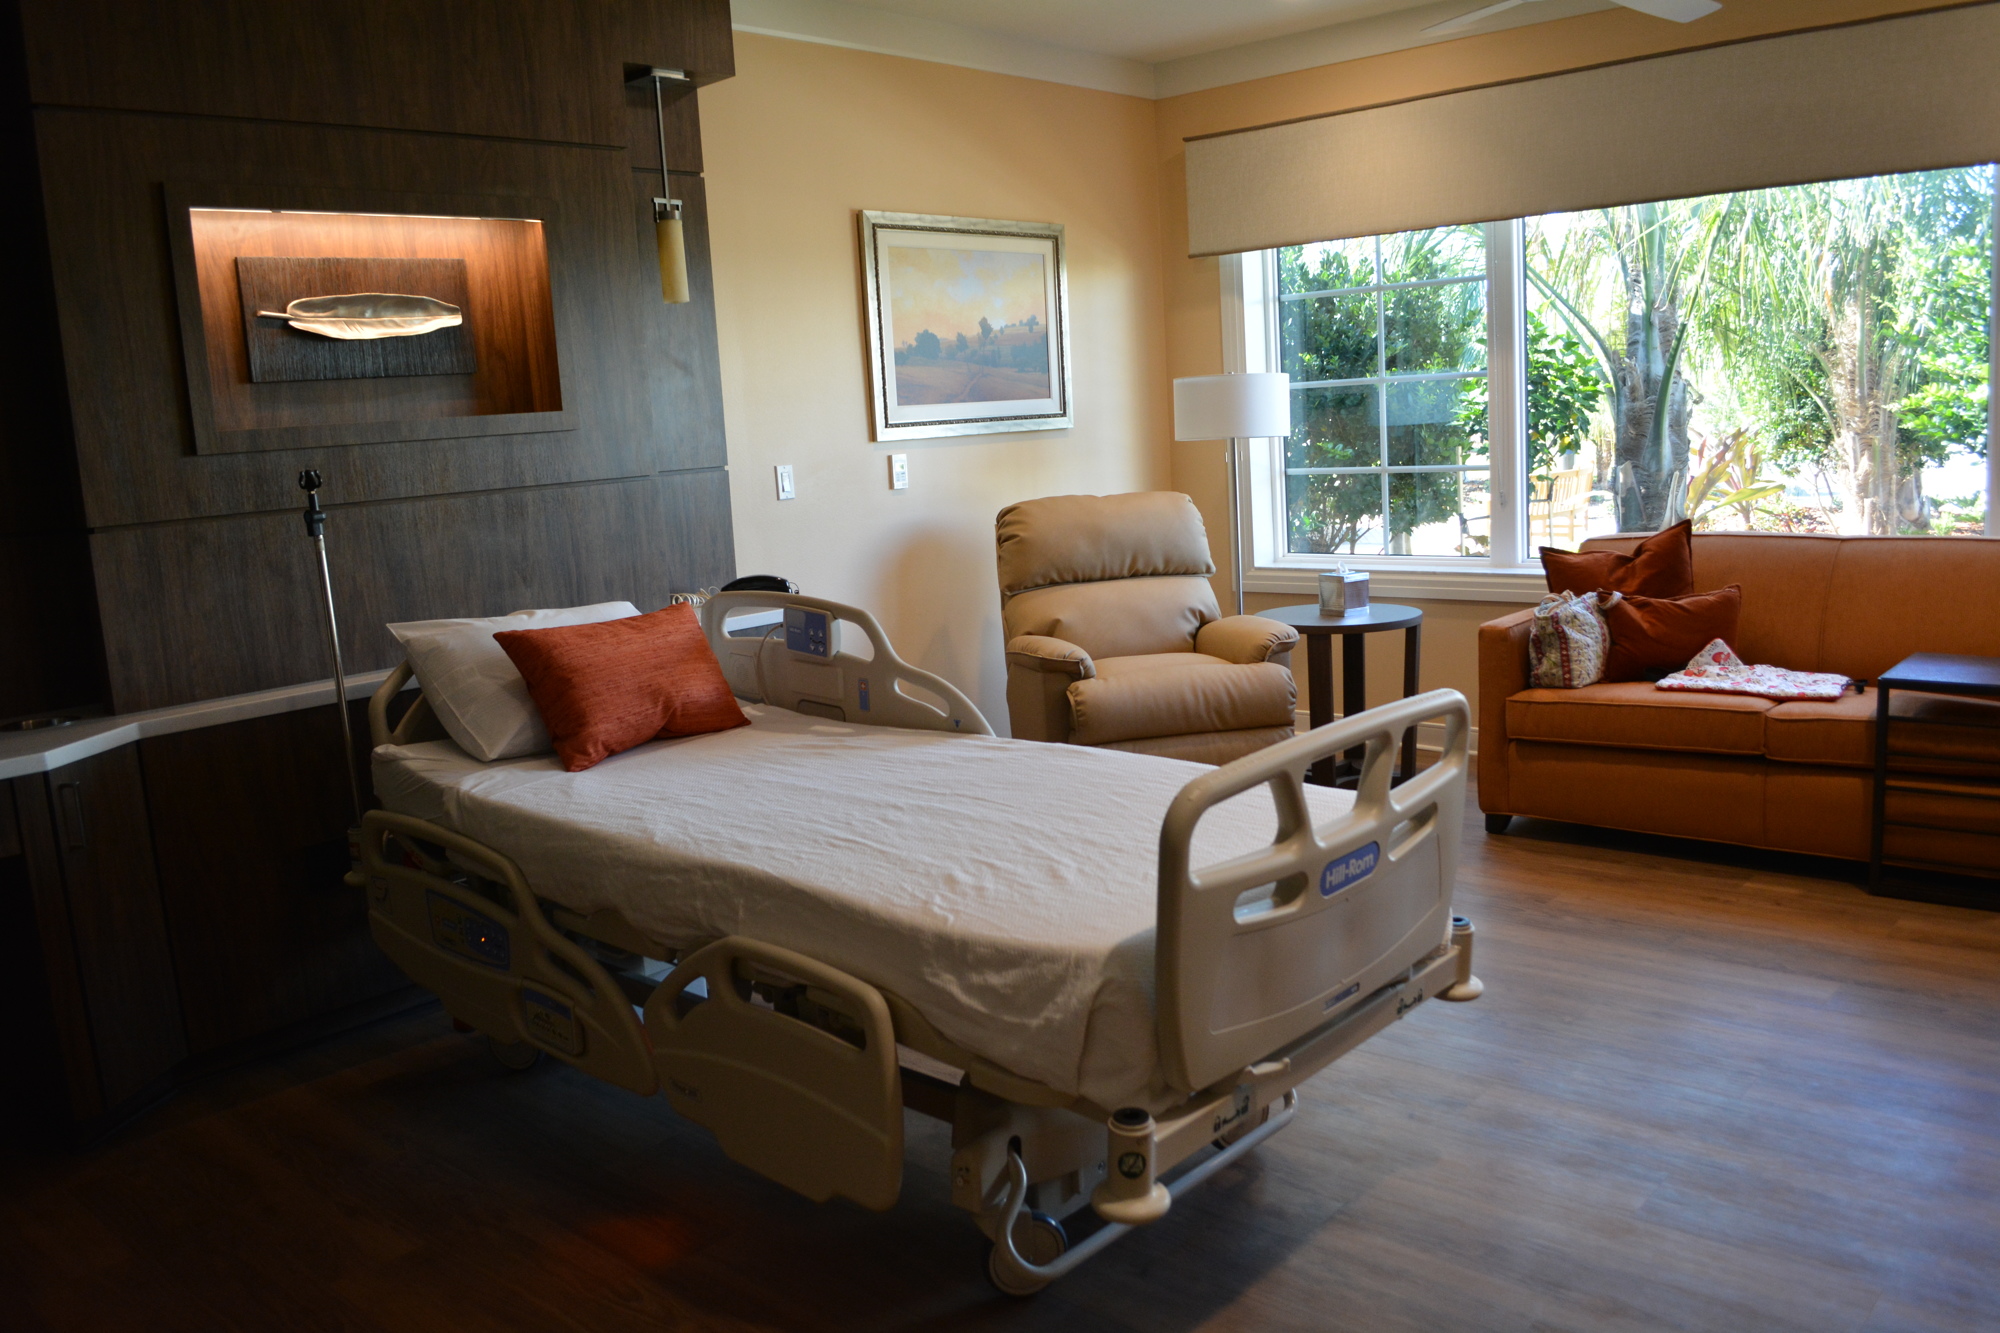 Bedrooms in the new Lakewood Ranch Hospice House are more than 300 square feet and have space for family to stay.